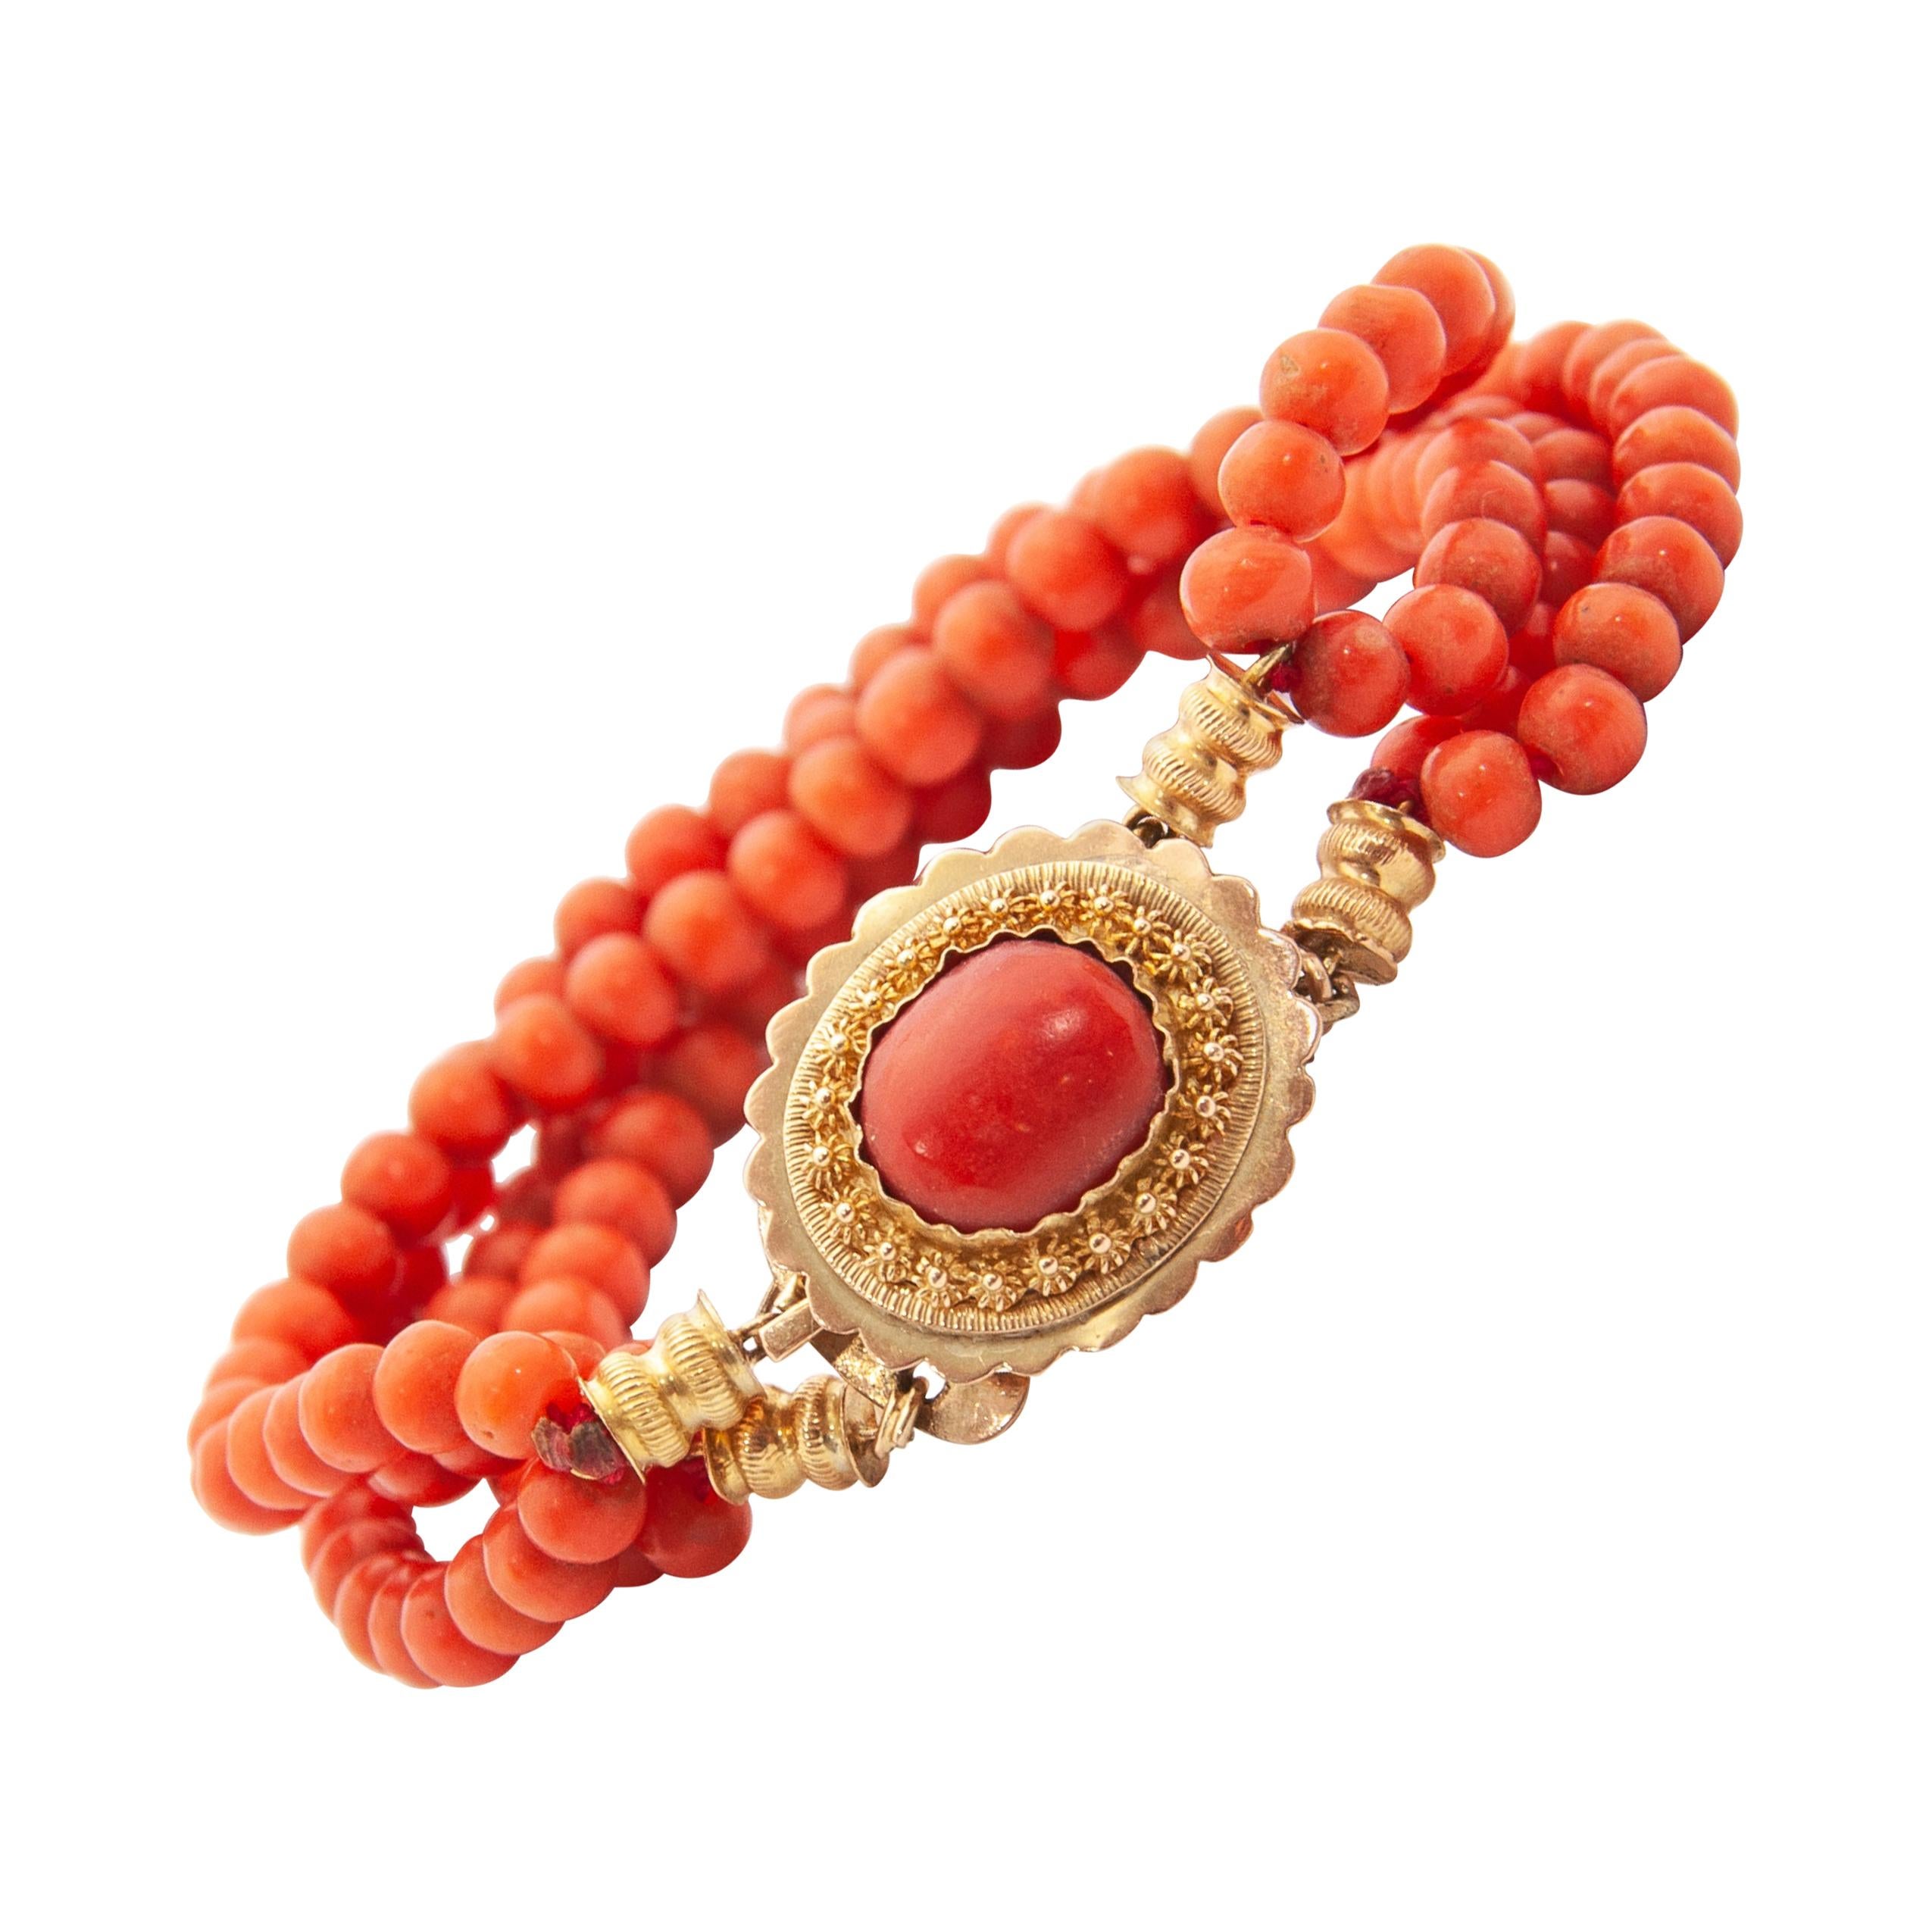 This antique 19th century coral children's bracelet is made with a 14 karat gold clasp. The beautiful ornate oval-shaped clasp is made of fine filigree and cannetille work, the craftsmanship is stunning. The center of the clasp is adorned with a